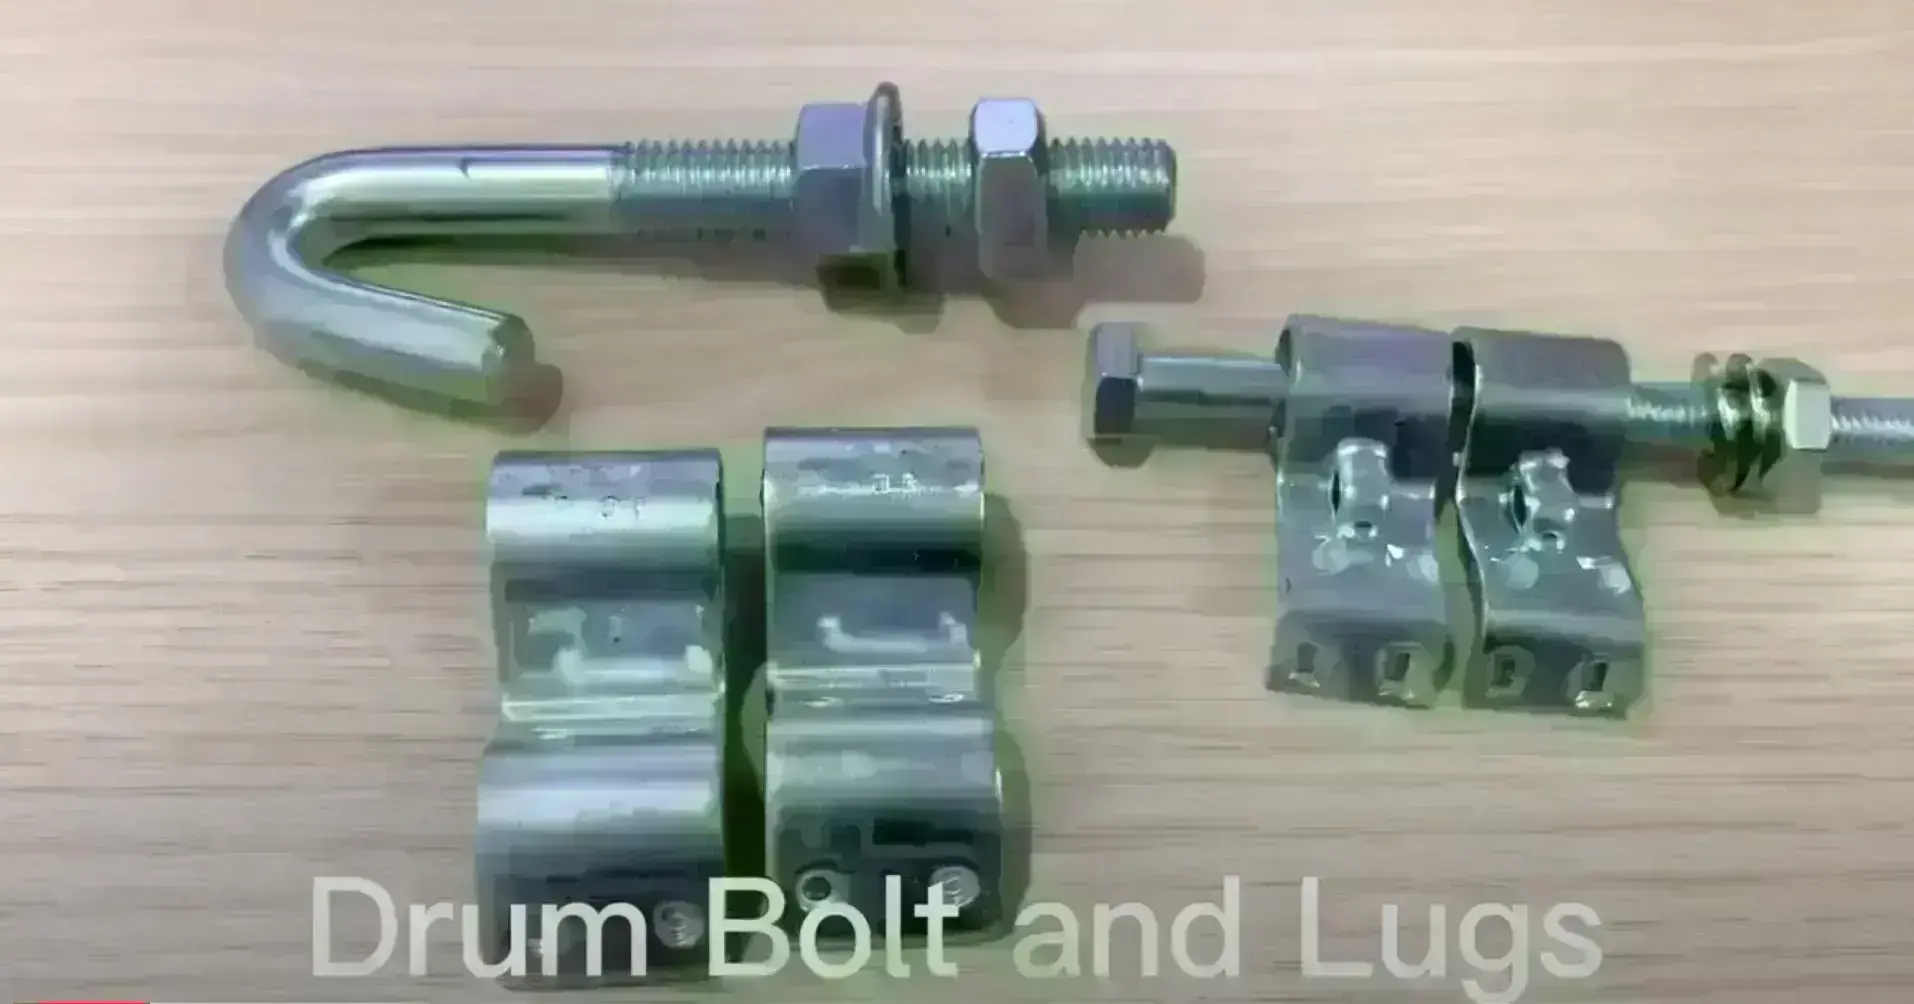 Drum Bolt and Lugs